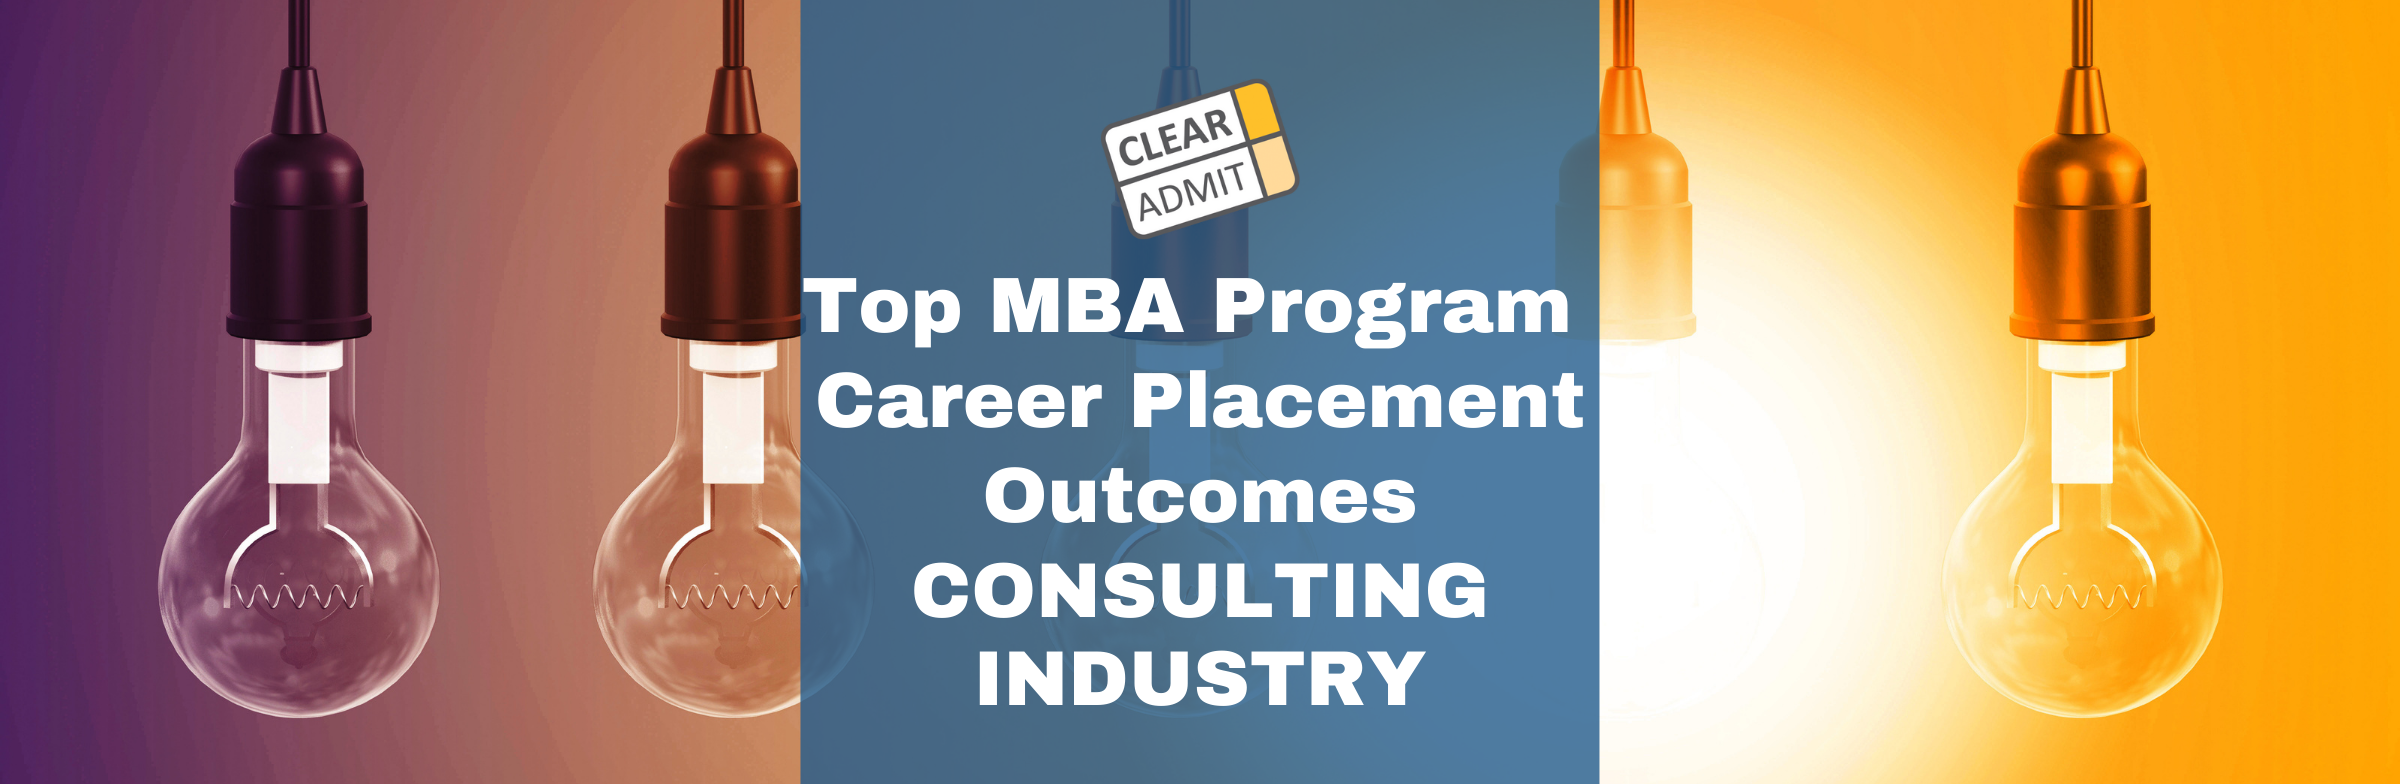 Image for Top MBA Program Career Placement Outcomes: U.S. Job Placement in the Management Consulting Industry